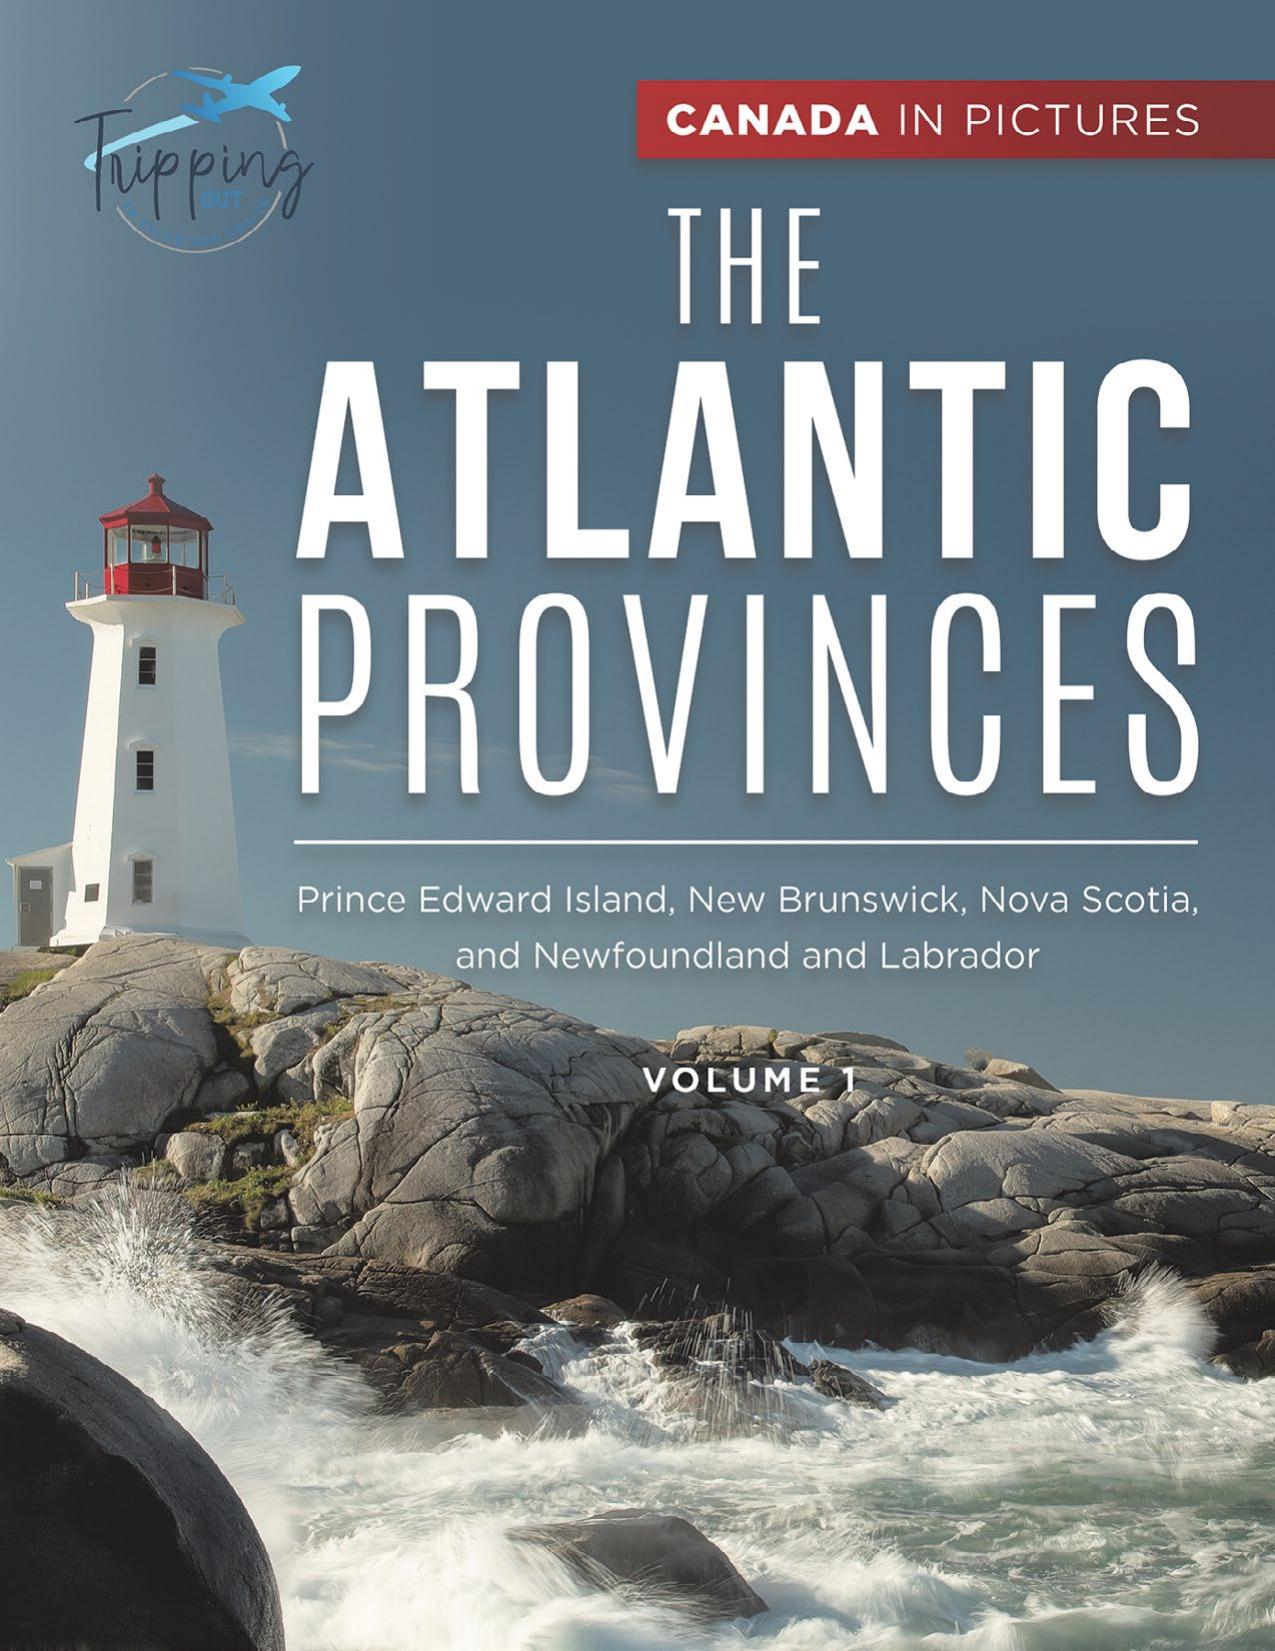 Canada In Pictures--The Atlantic Provinces--Volume 1--Prince Edward Island, New Brunswick, Nova Scotia, and Newfoundland and Labrador by Tripping Out